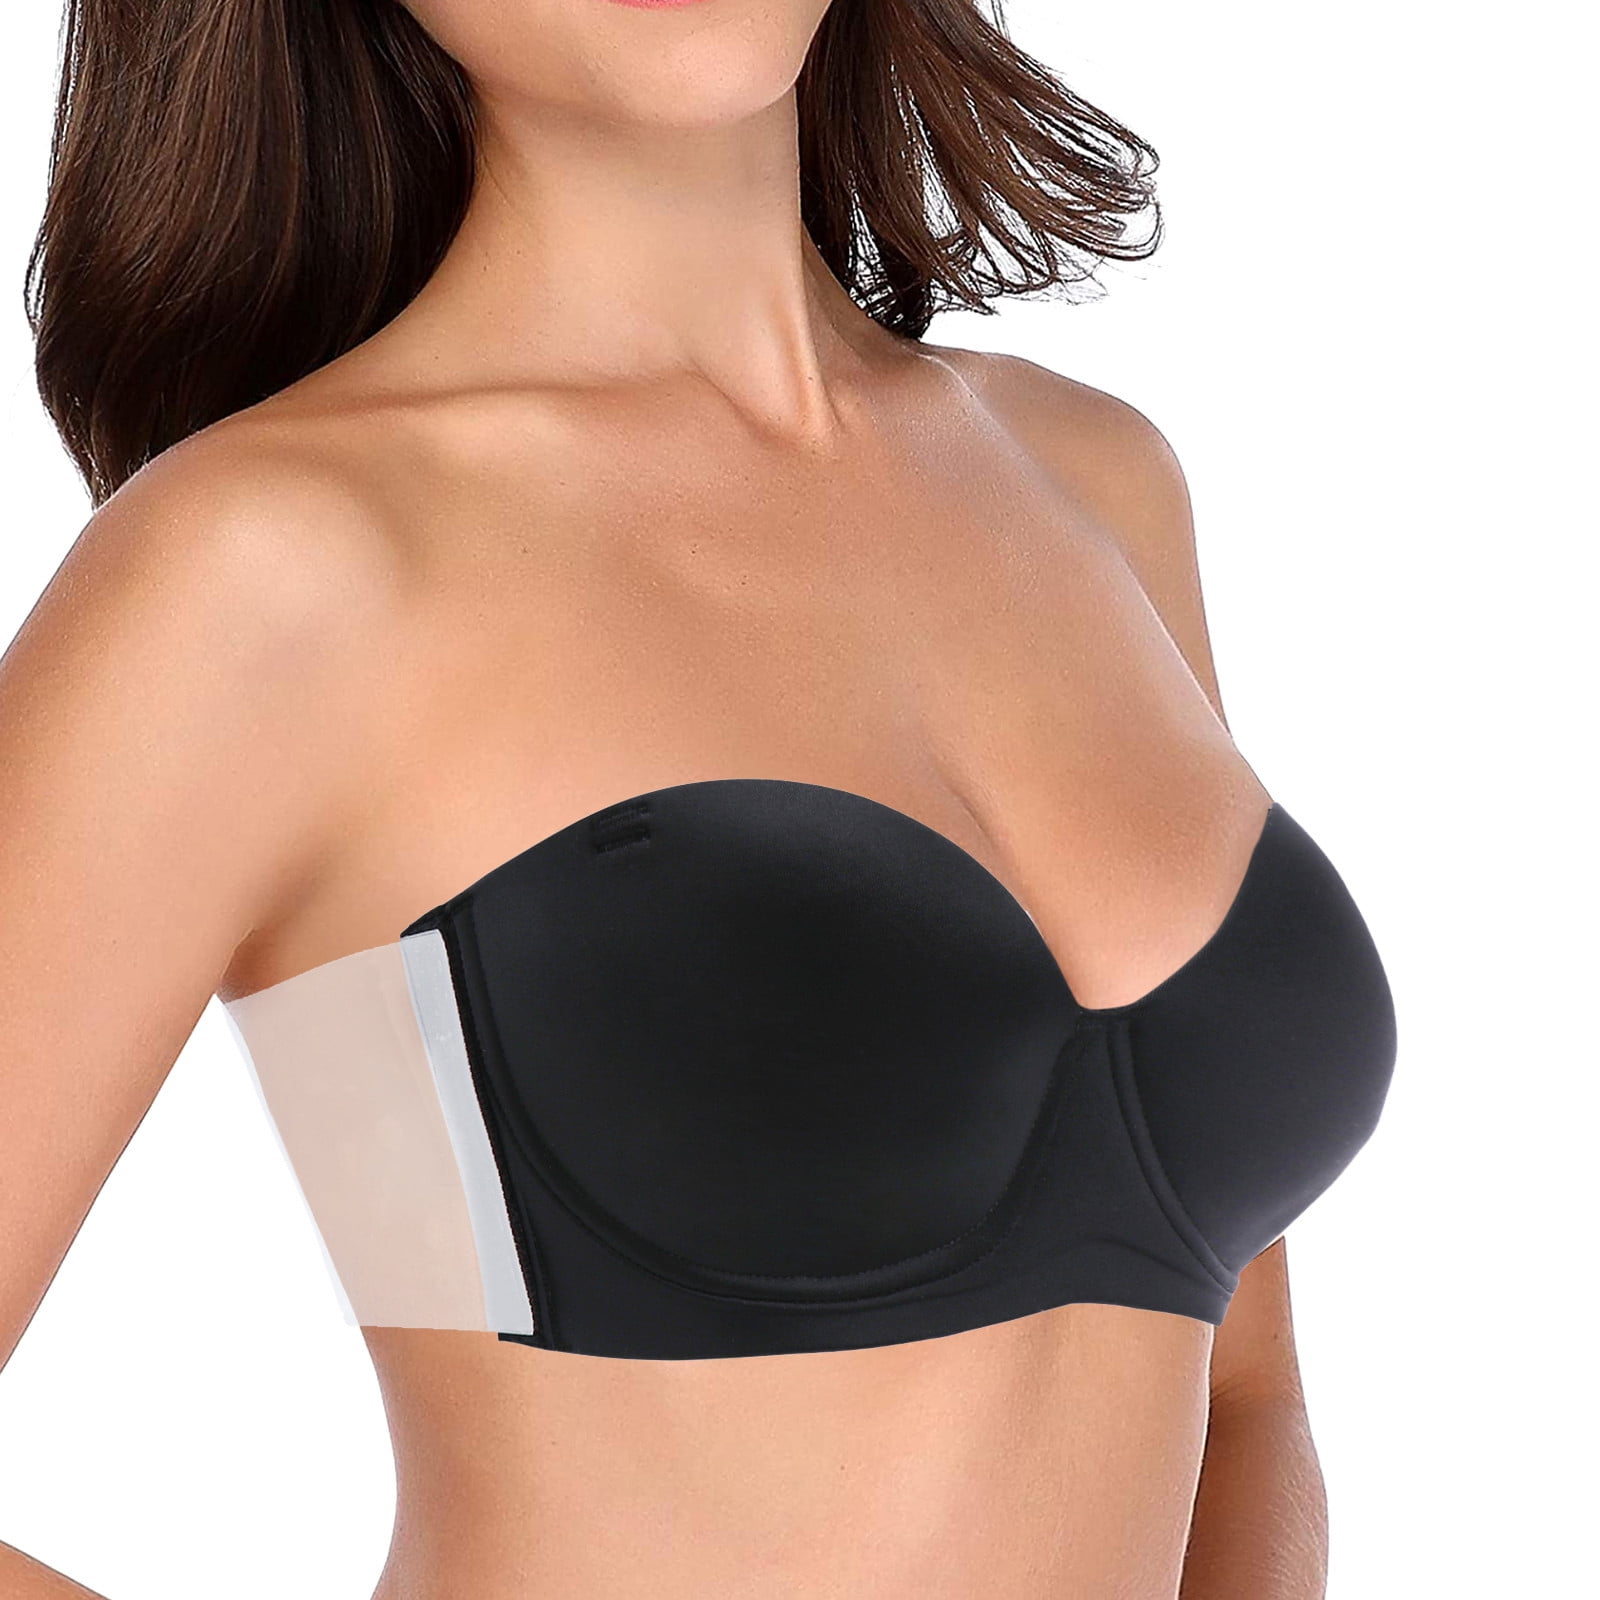 Gueuusu Plus Size Strapless Bra Bandeau Tube Removable Padded Top